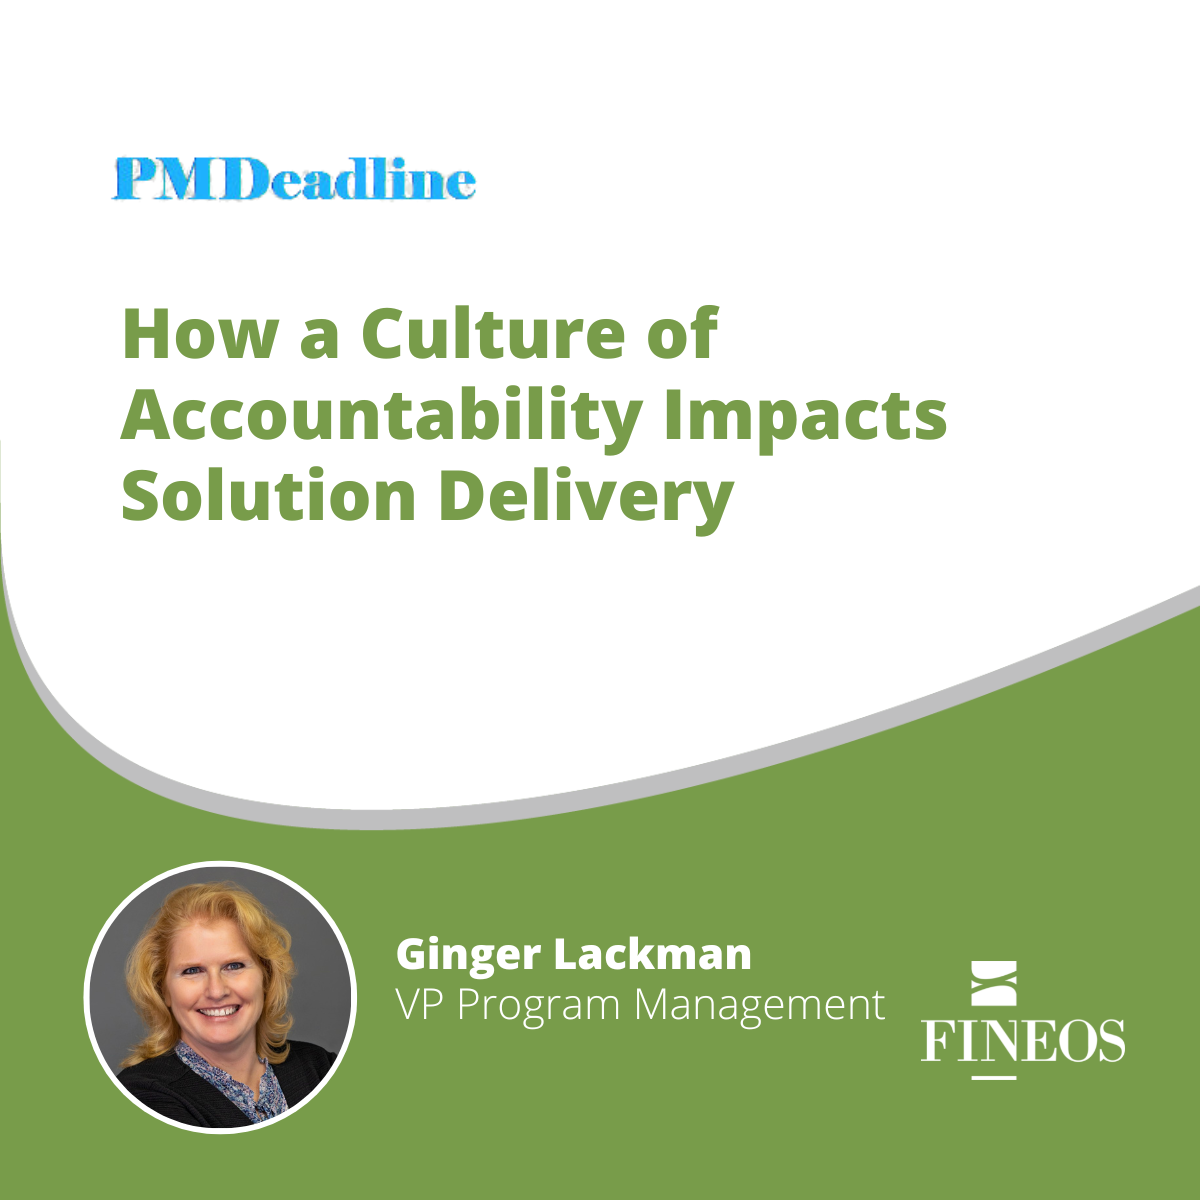 How a Culture of Accountability Impacts Solution Delivery